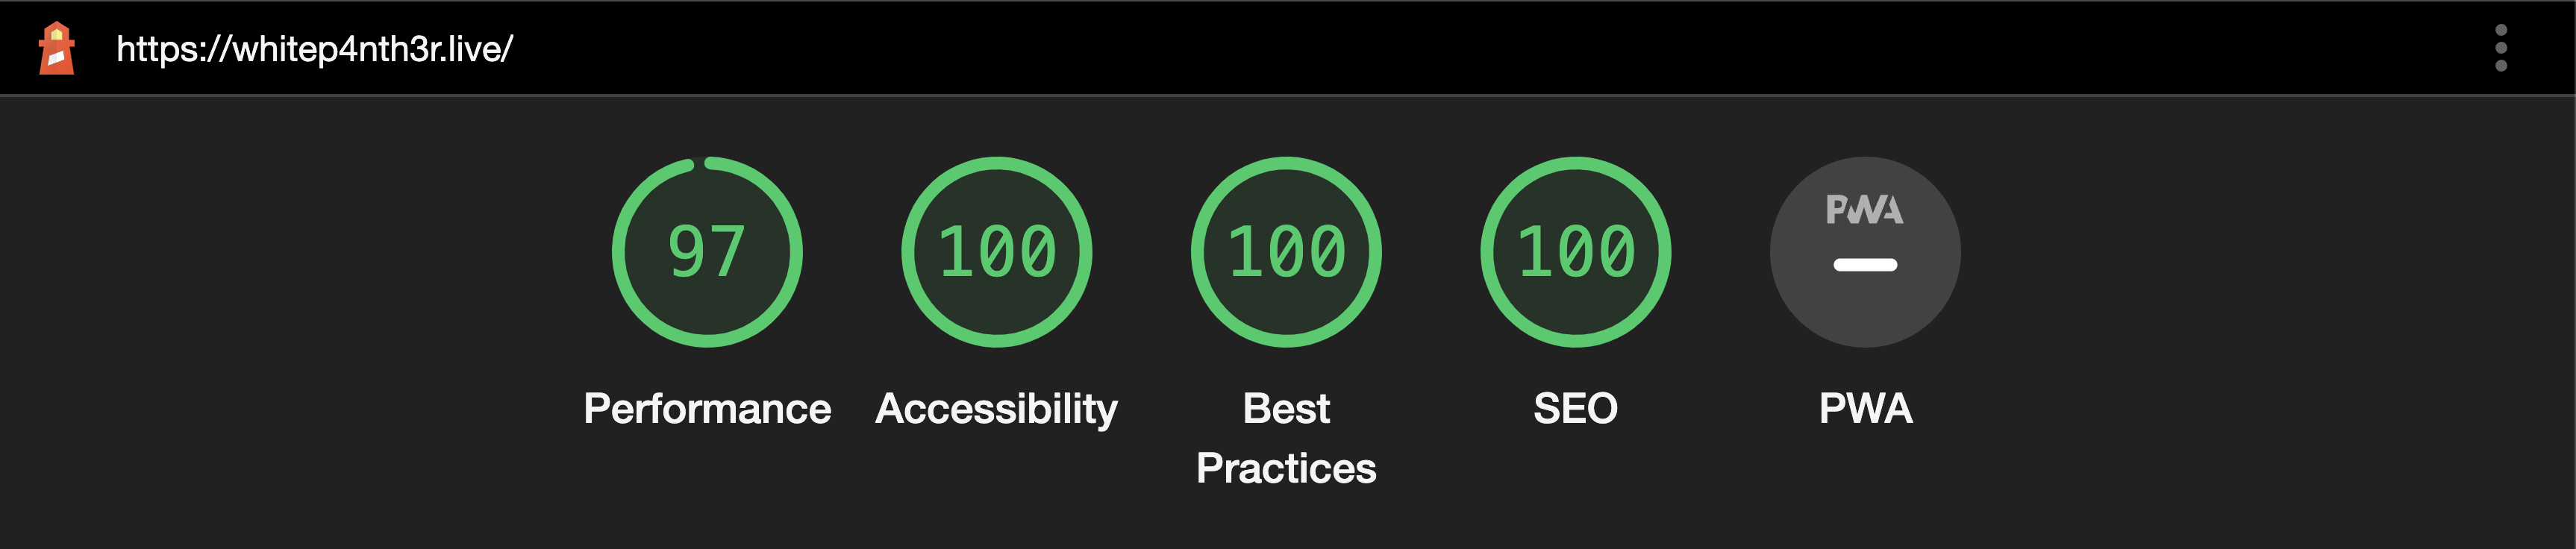 The Google Lighthouse scores for whitep4nth3r.live, showing 97 performance, 100 accessibility, 100 best practises, and 100 SEO.